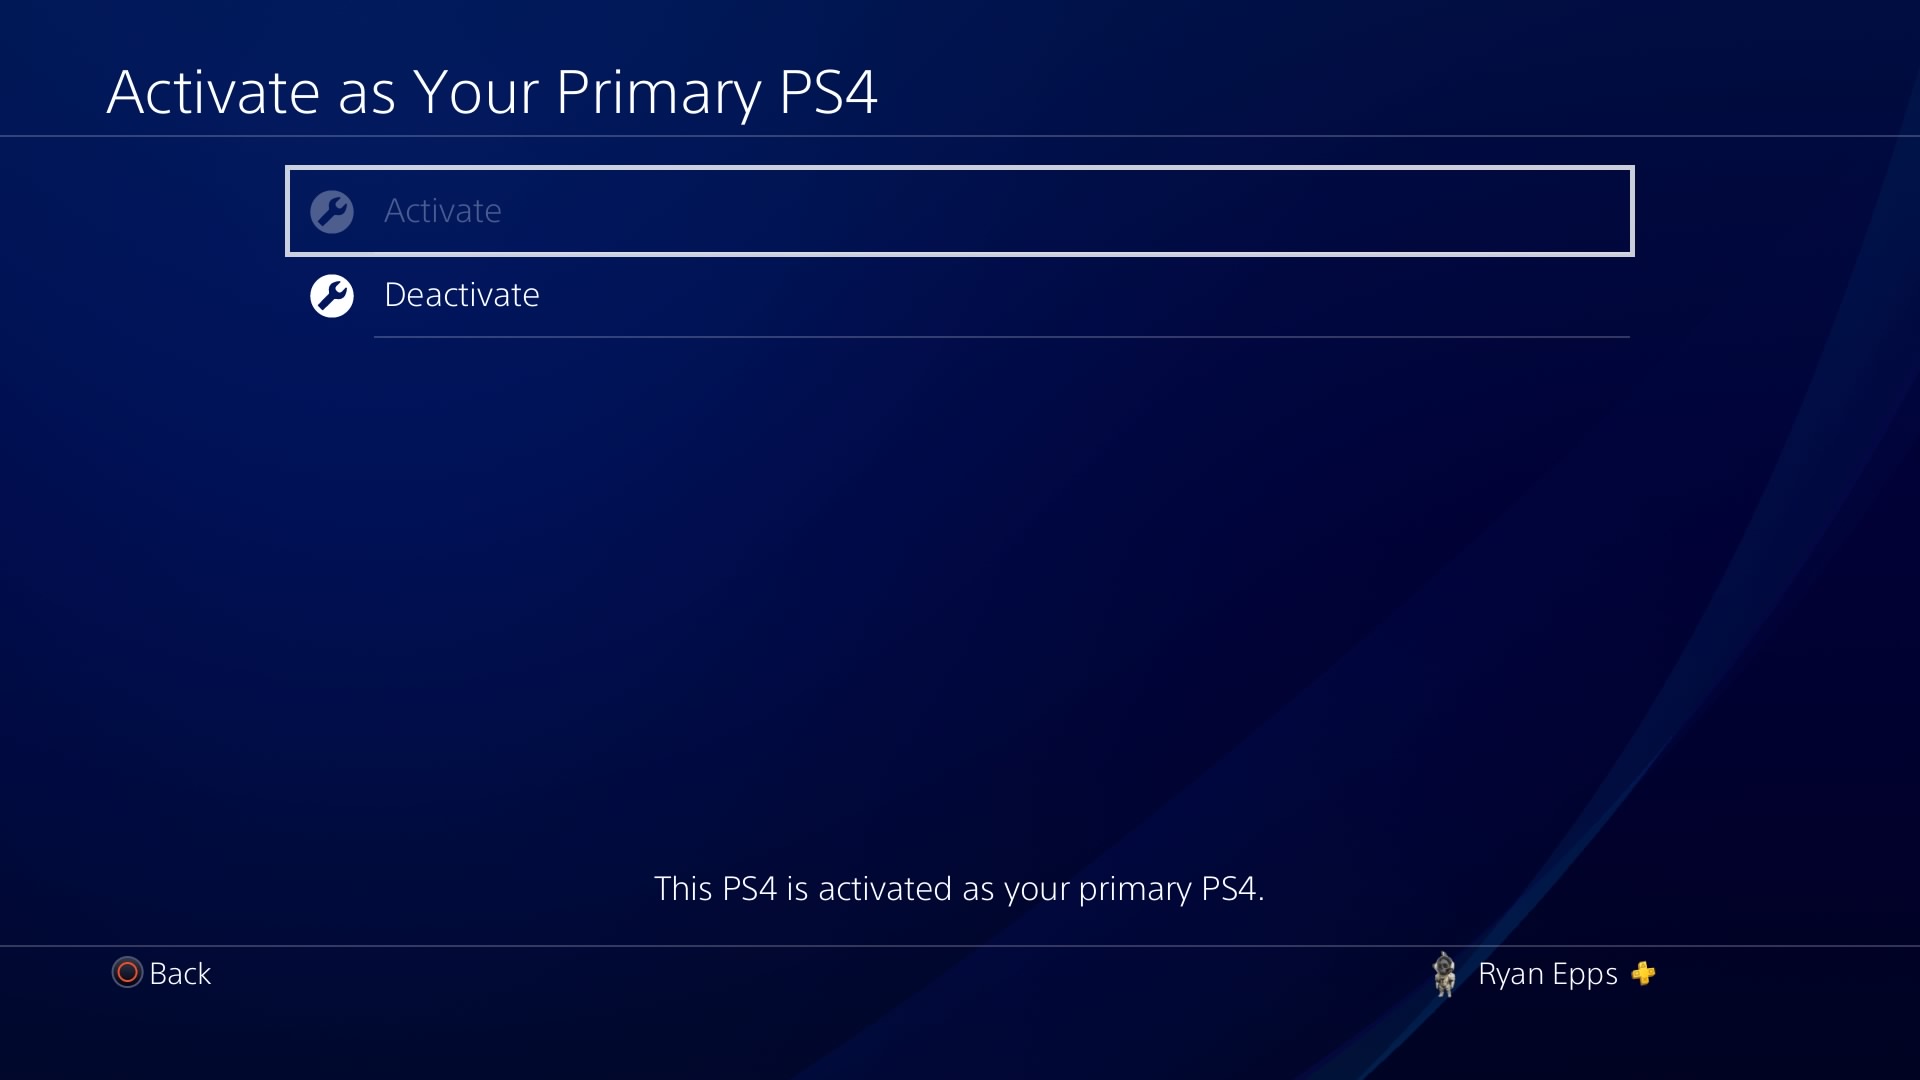 Forgot PS4 Password - How to Reset Password on PS4 